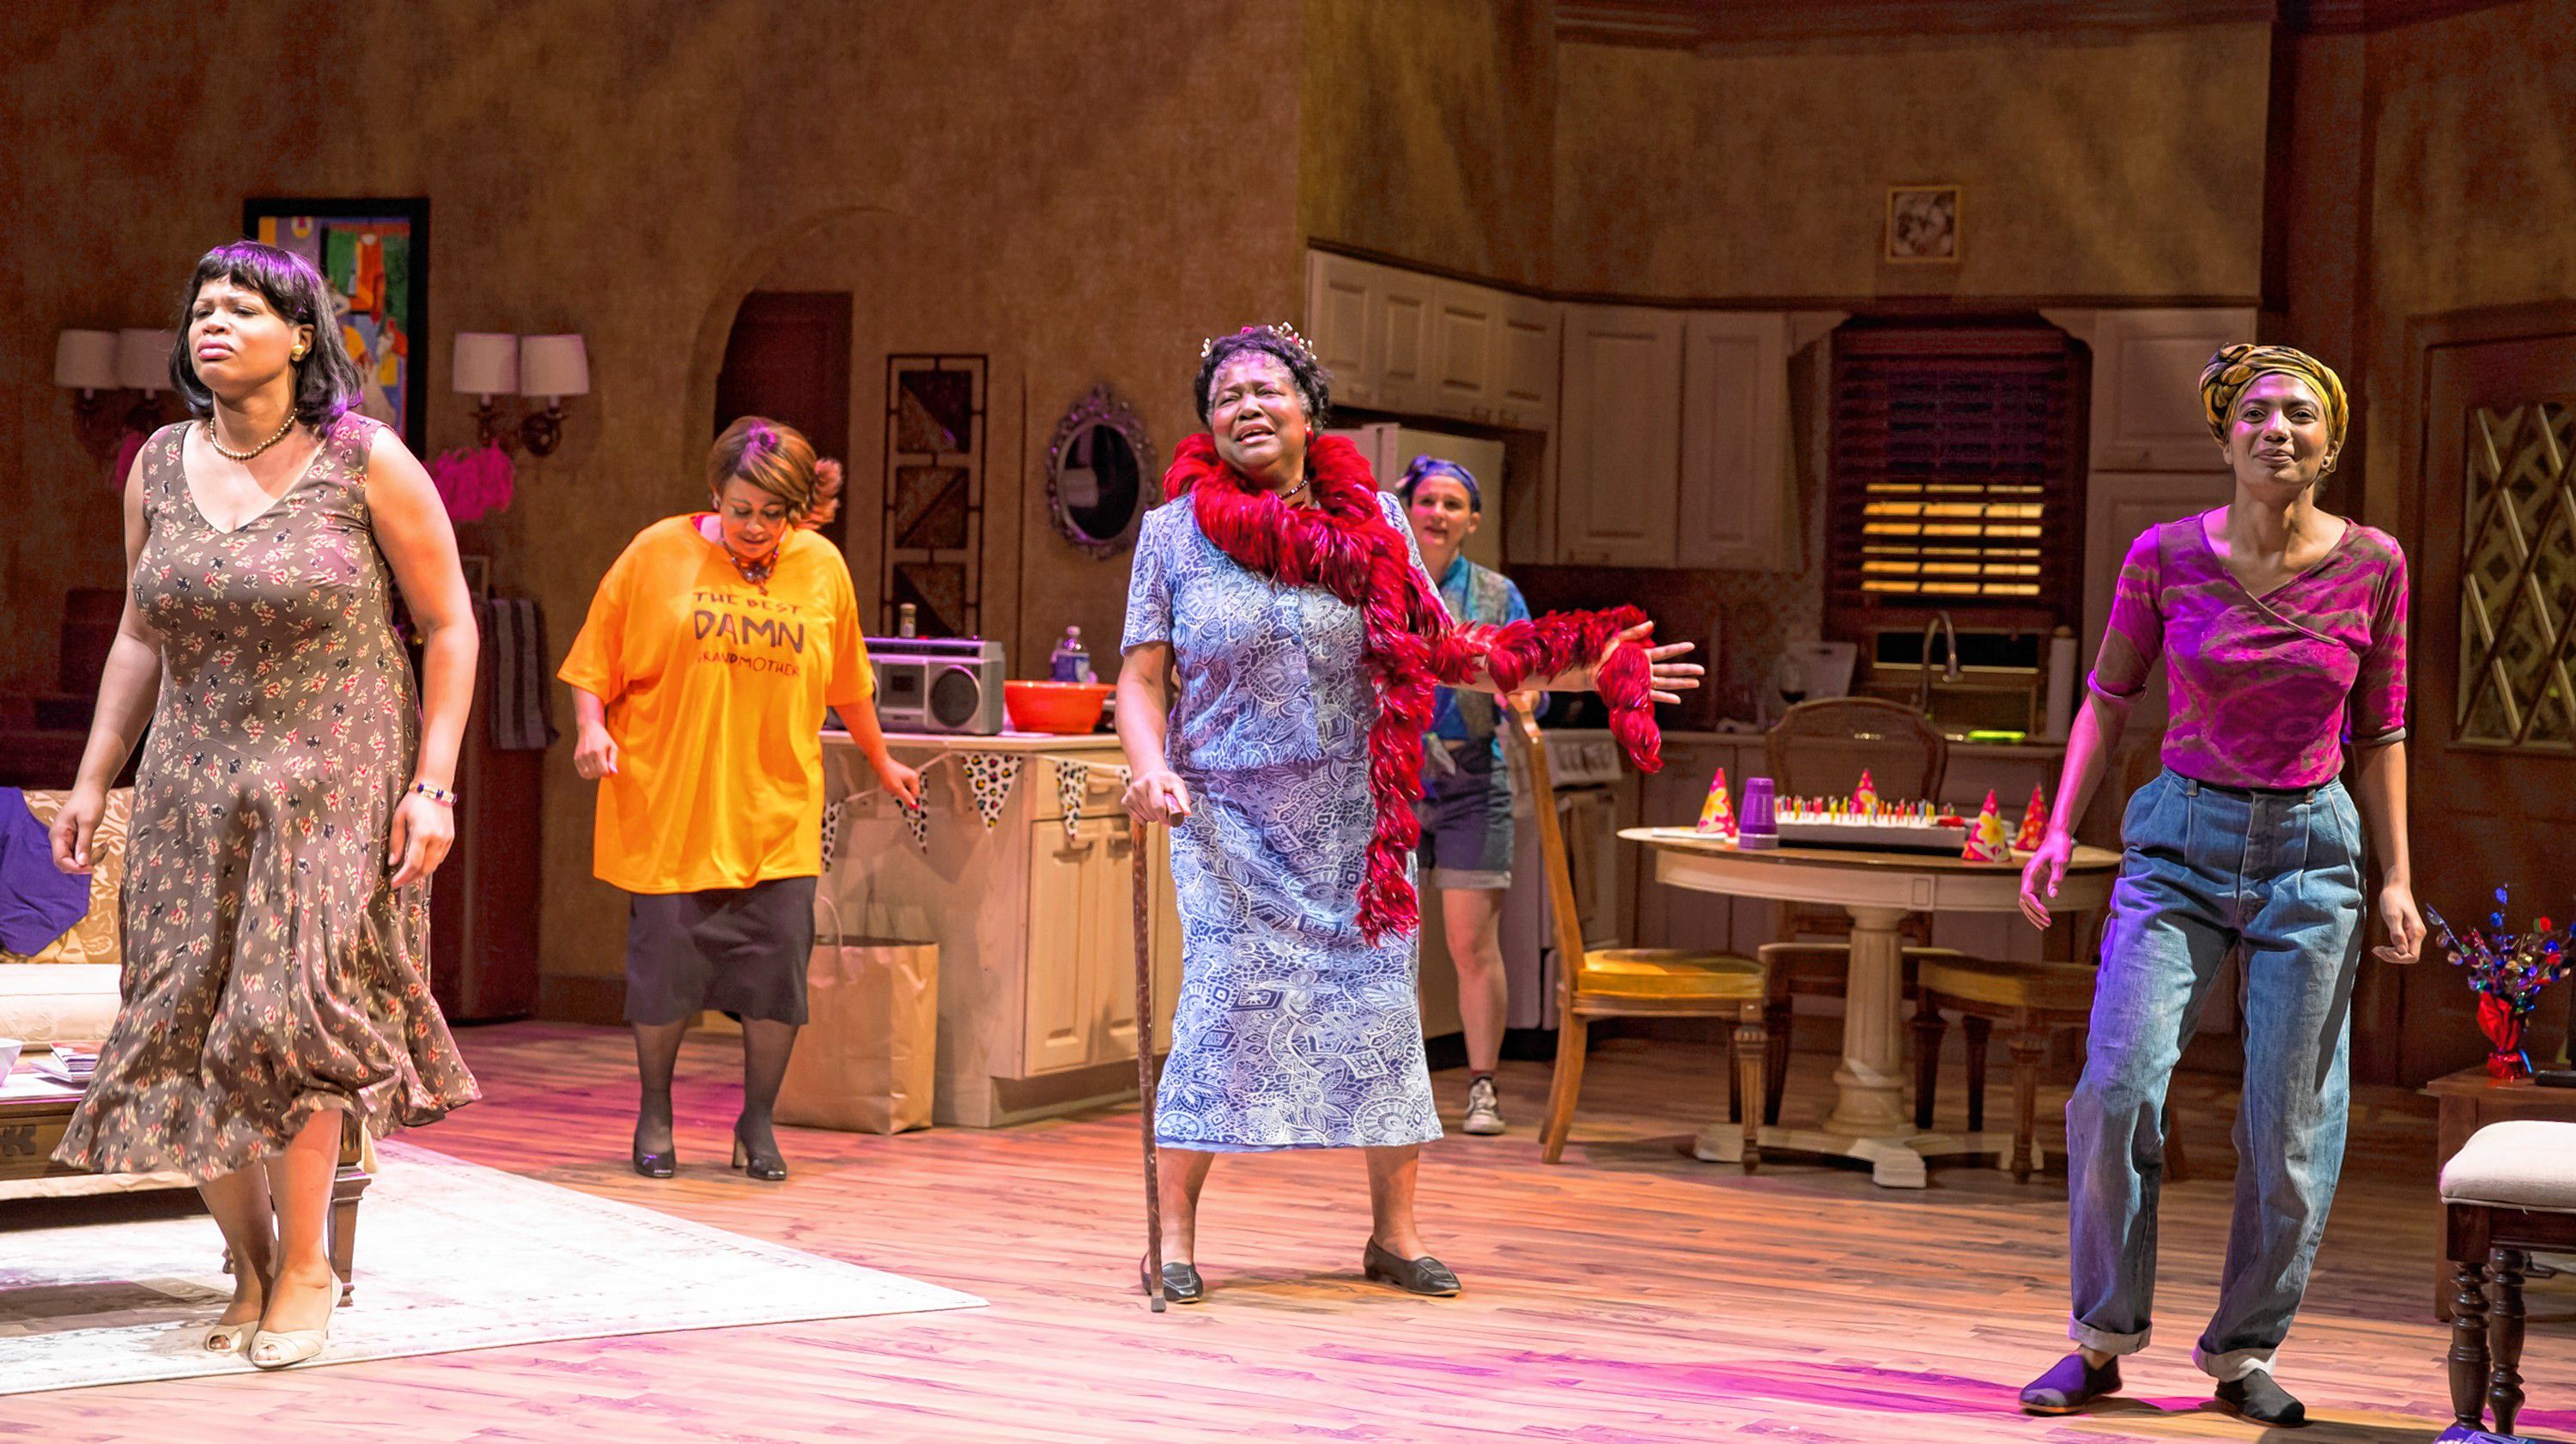 Stagestruck: Crossing the Color Line — Area theaters give (some) stage space to artists of color